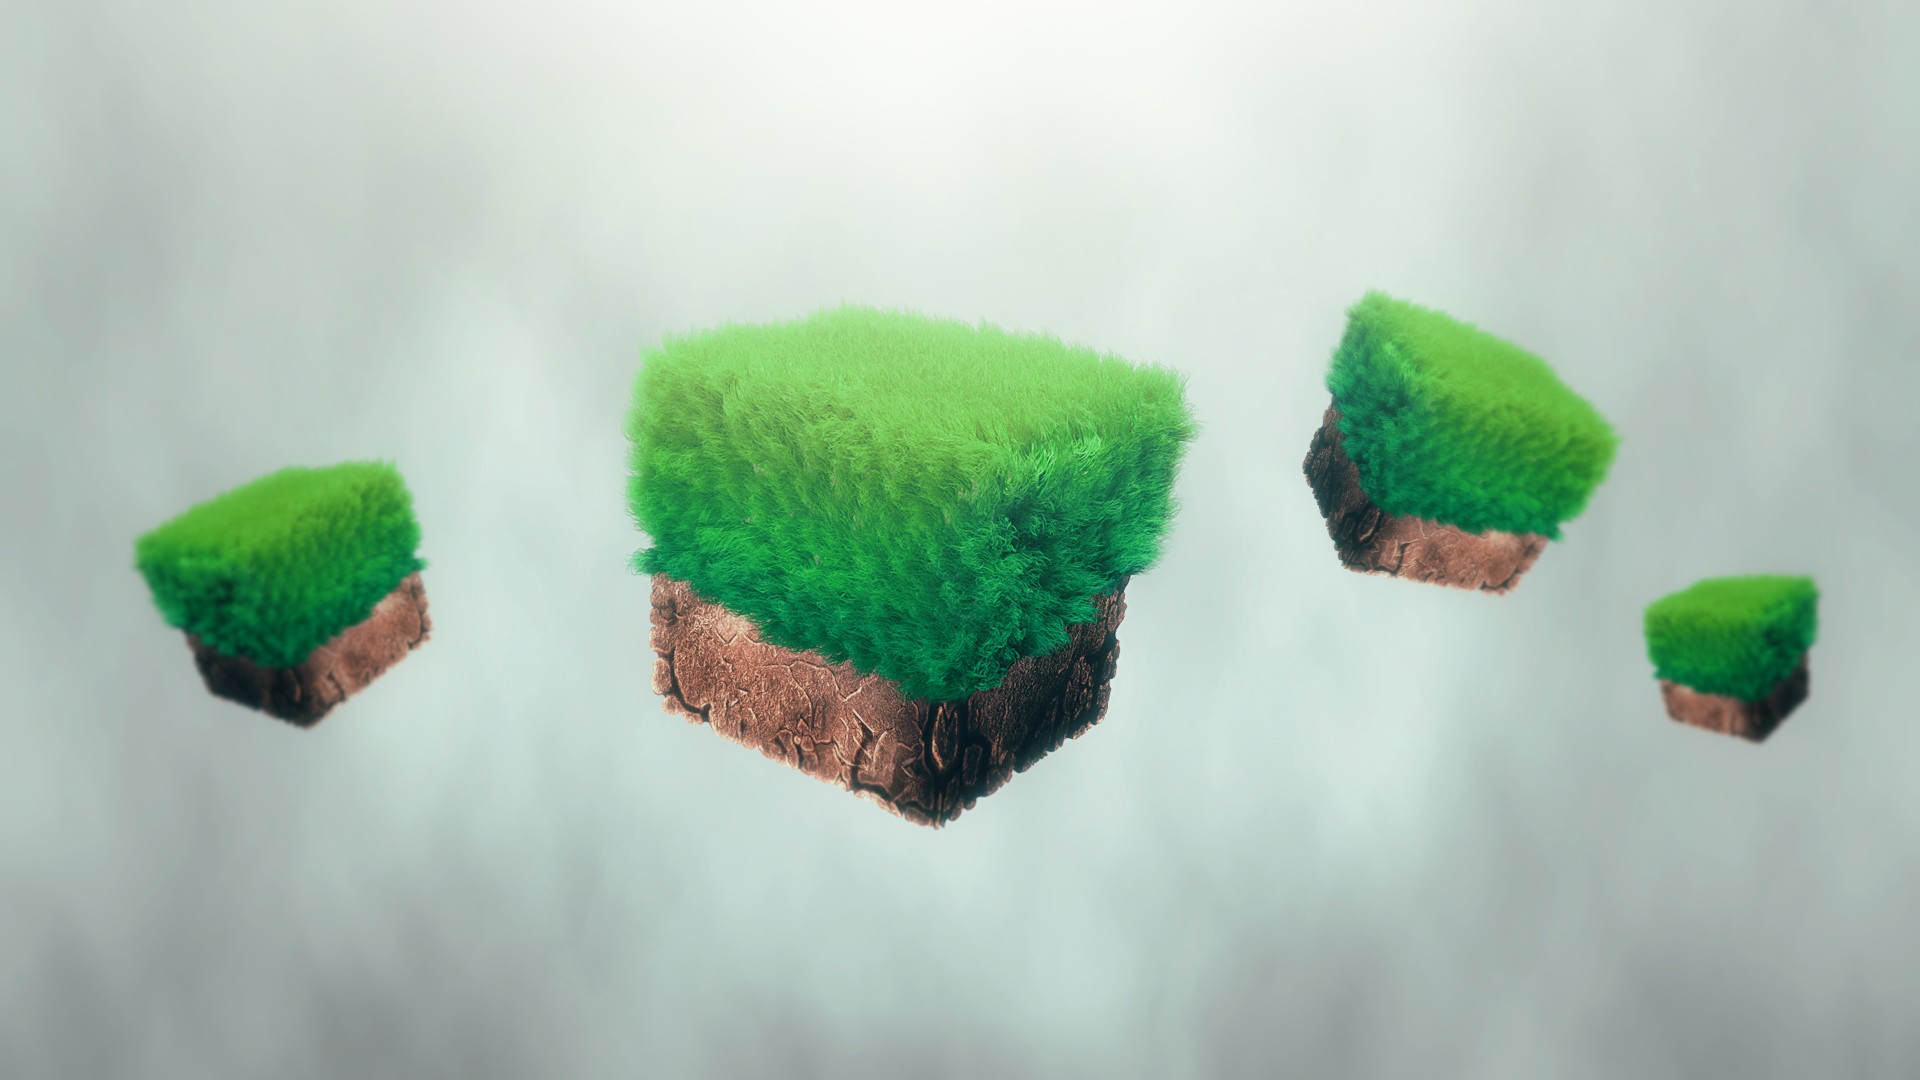 Minecraft, Chunky, Video games, Retro games, Cube, Project Reality, Graphic design Wallpaper